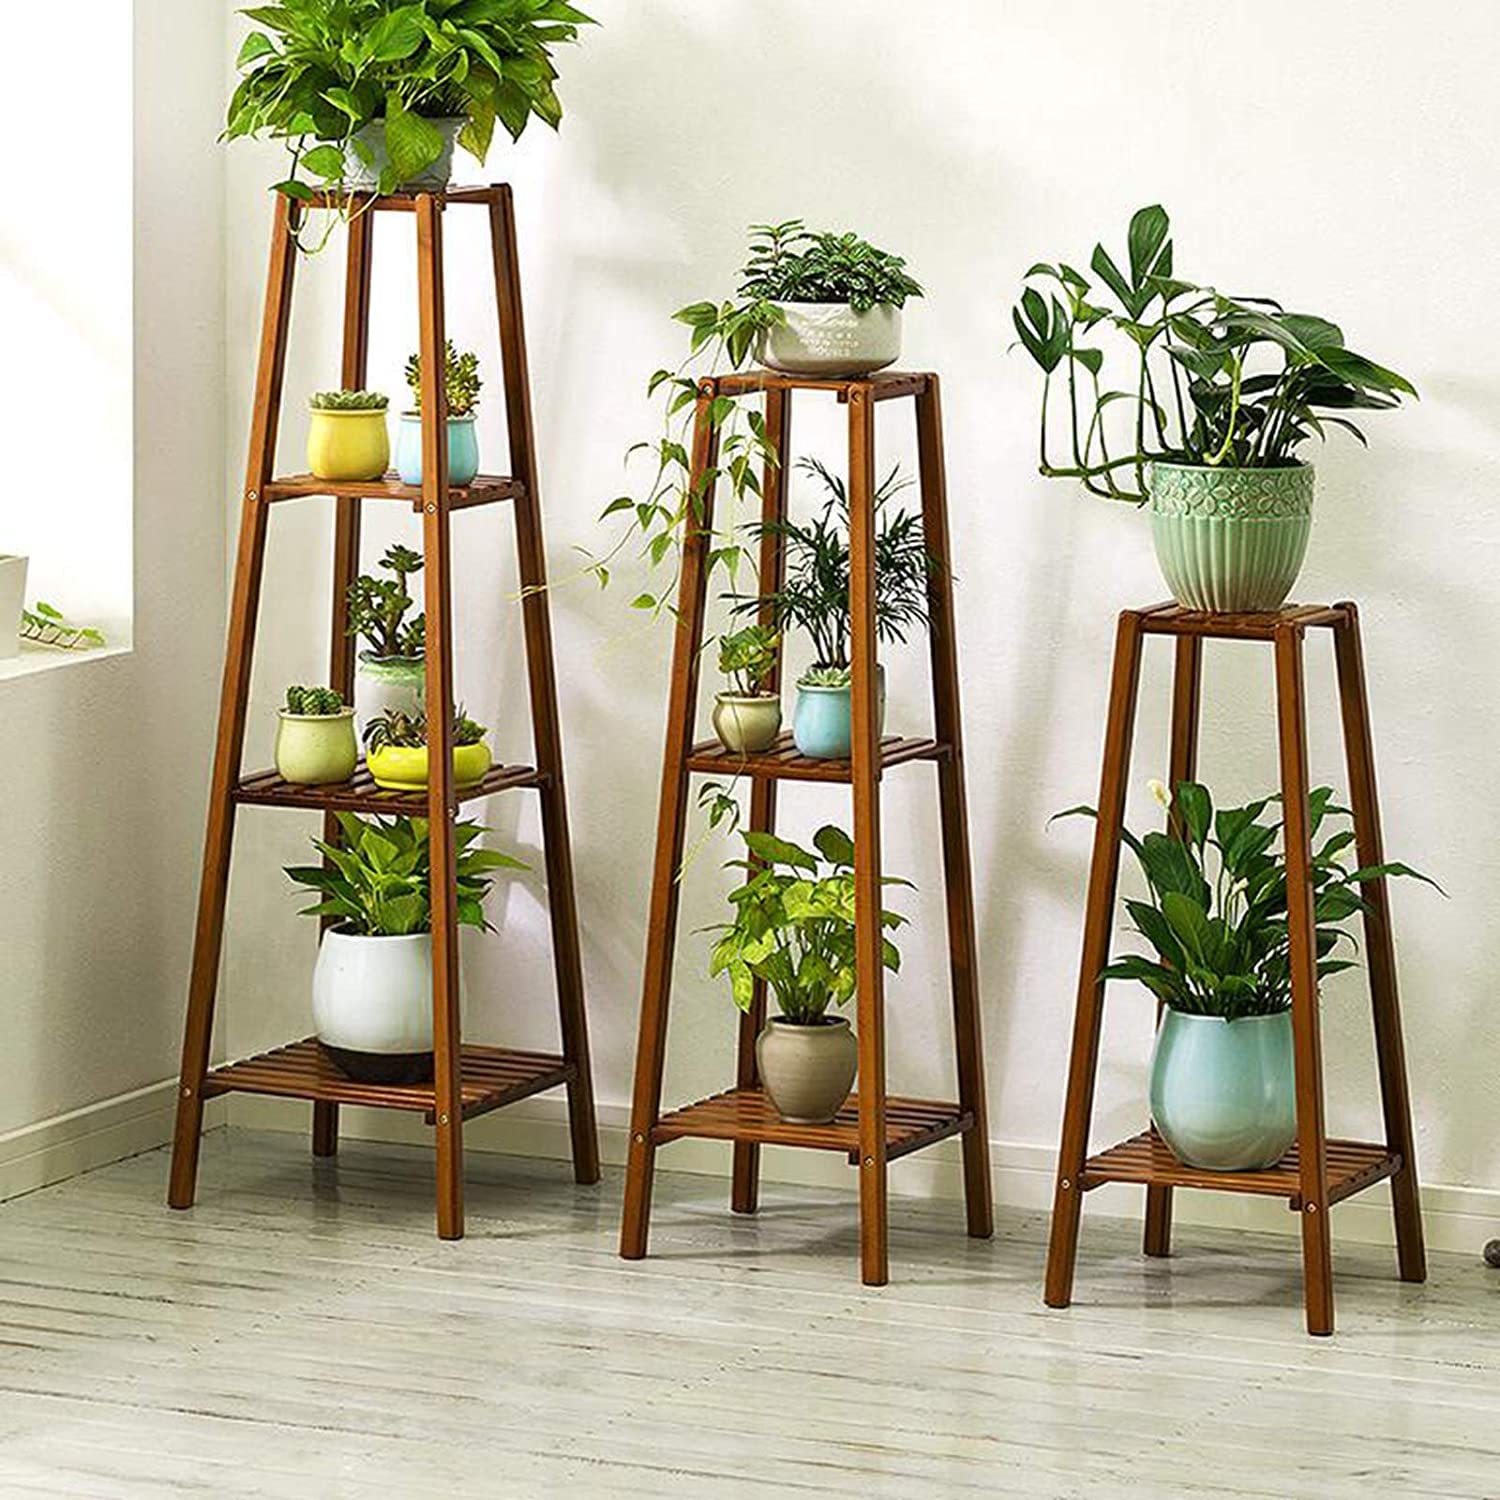 Magshion Bamboo Tall Plant Stand Pot Holder Small Space Flower Shelf Rack Display Table (2-Tier)